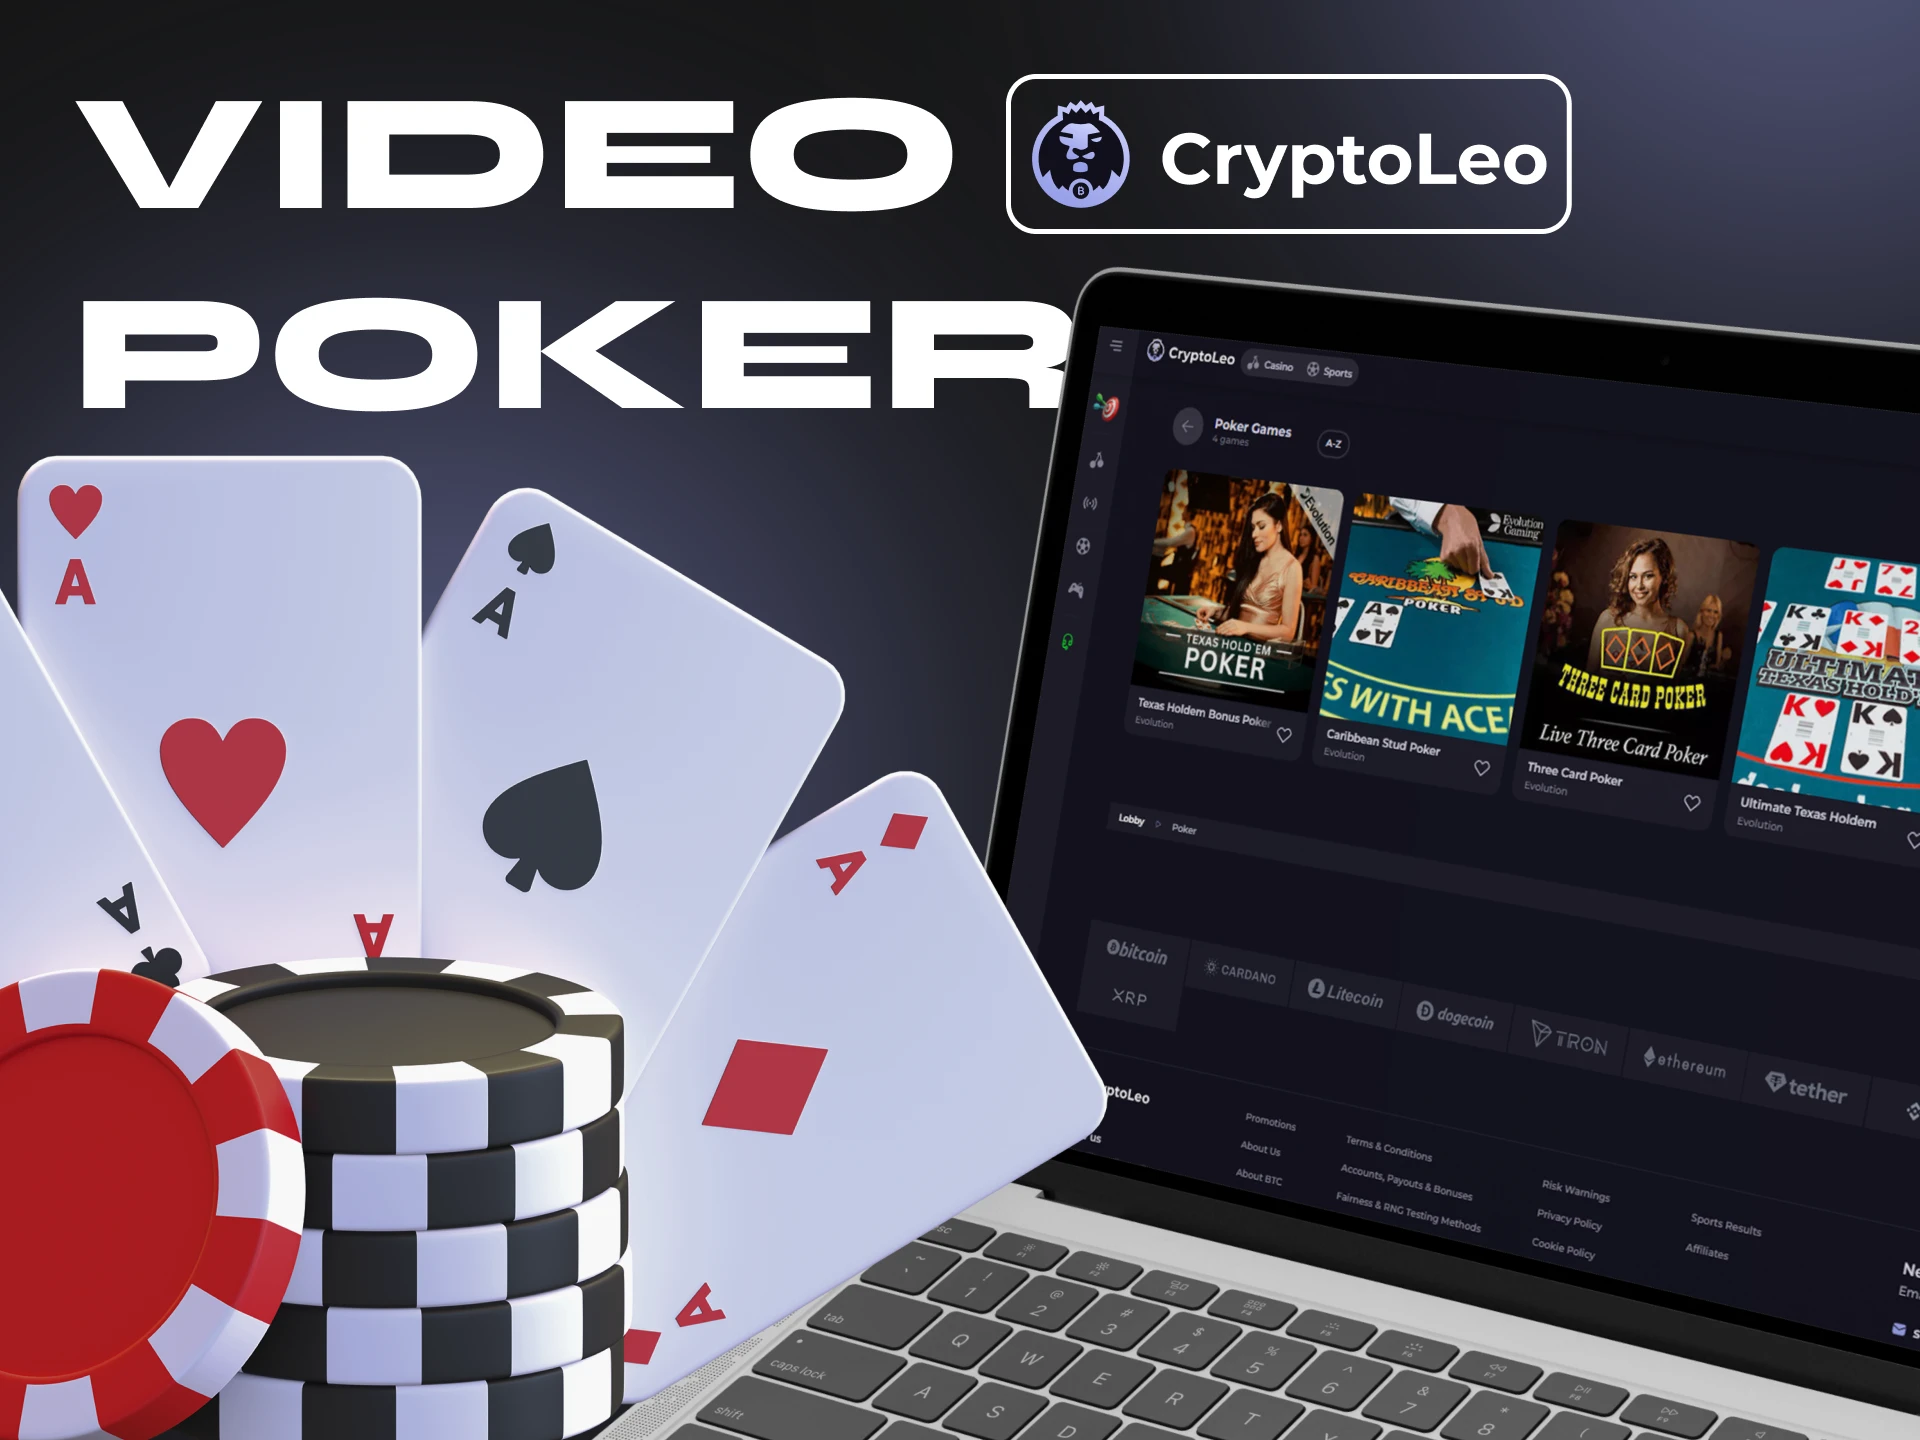 Try one of the most popular poker game on Cryptoleo.